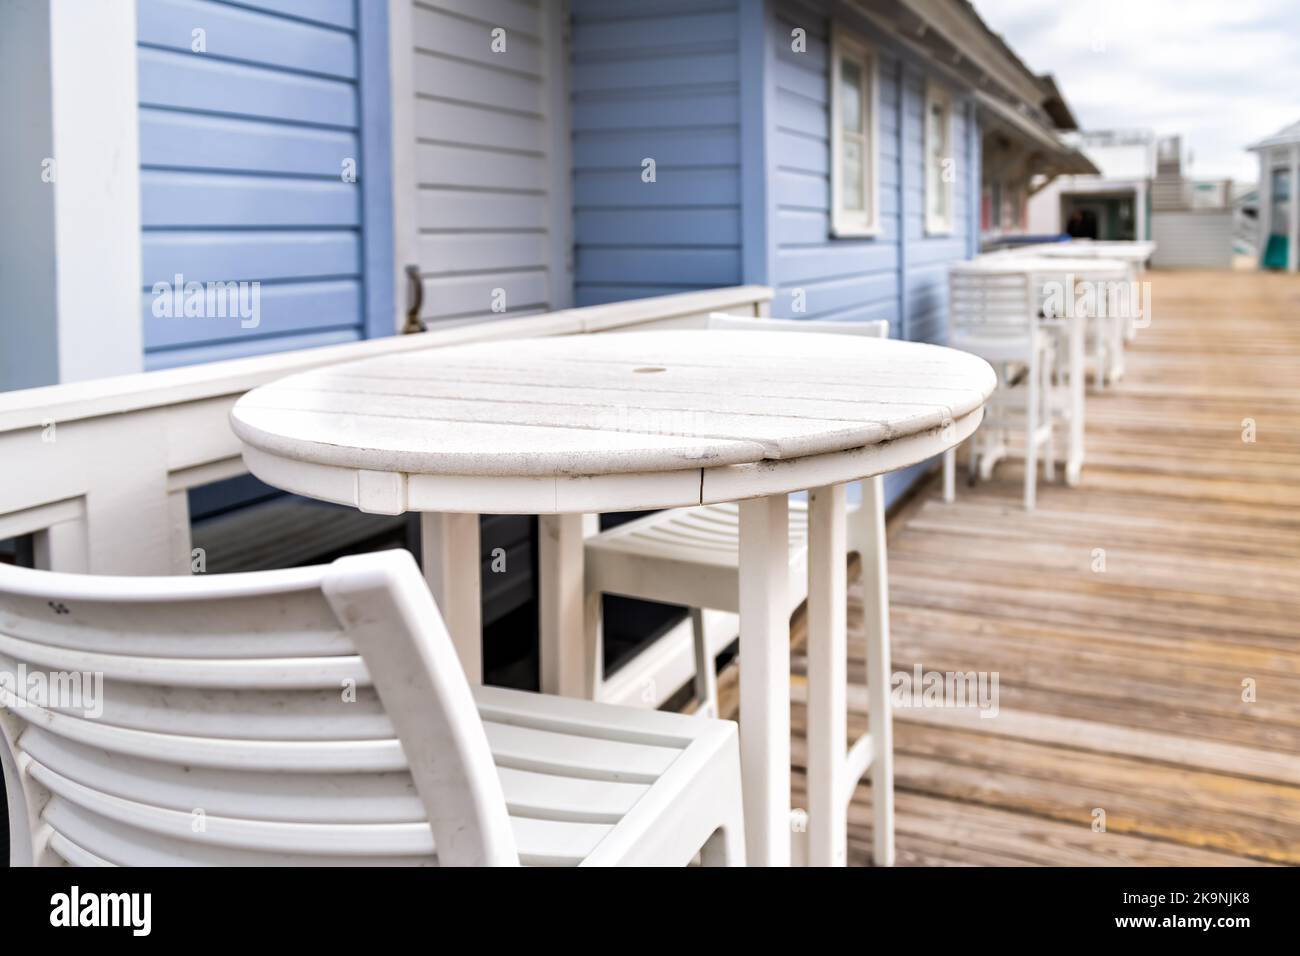 Seaside with empty chairs bar stools, round wooden tables in winter Florida Panhandle city town beach village with white blue architecture restaurant Stock Photo